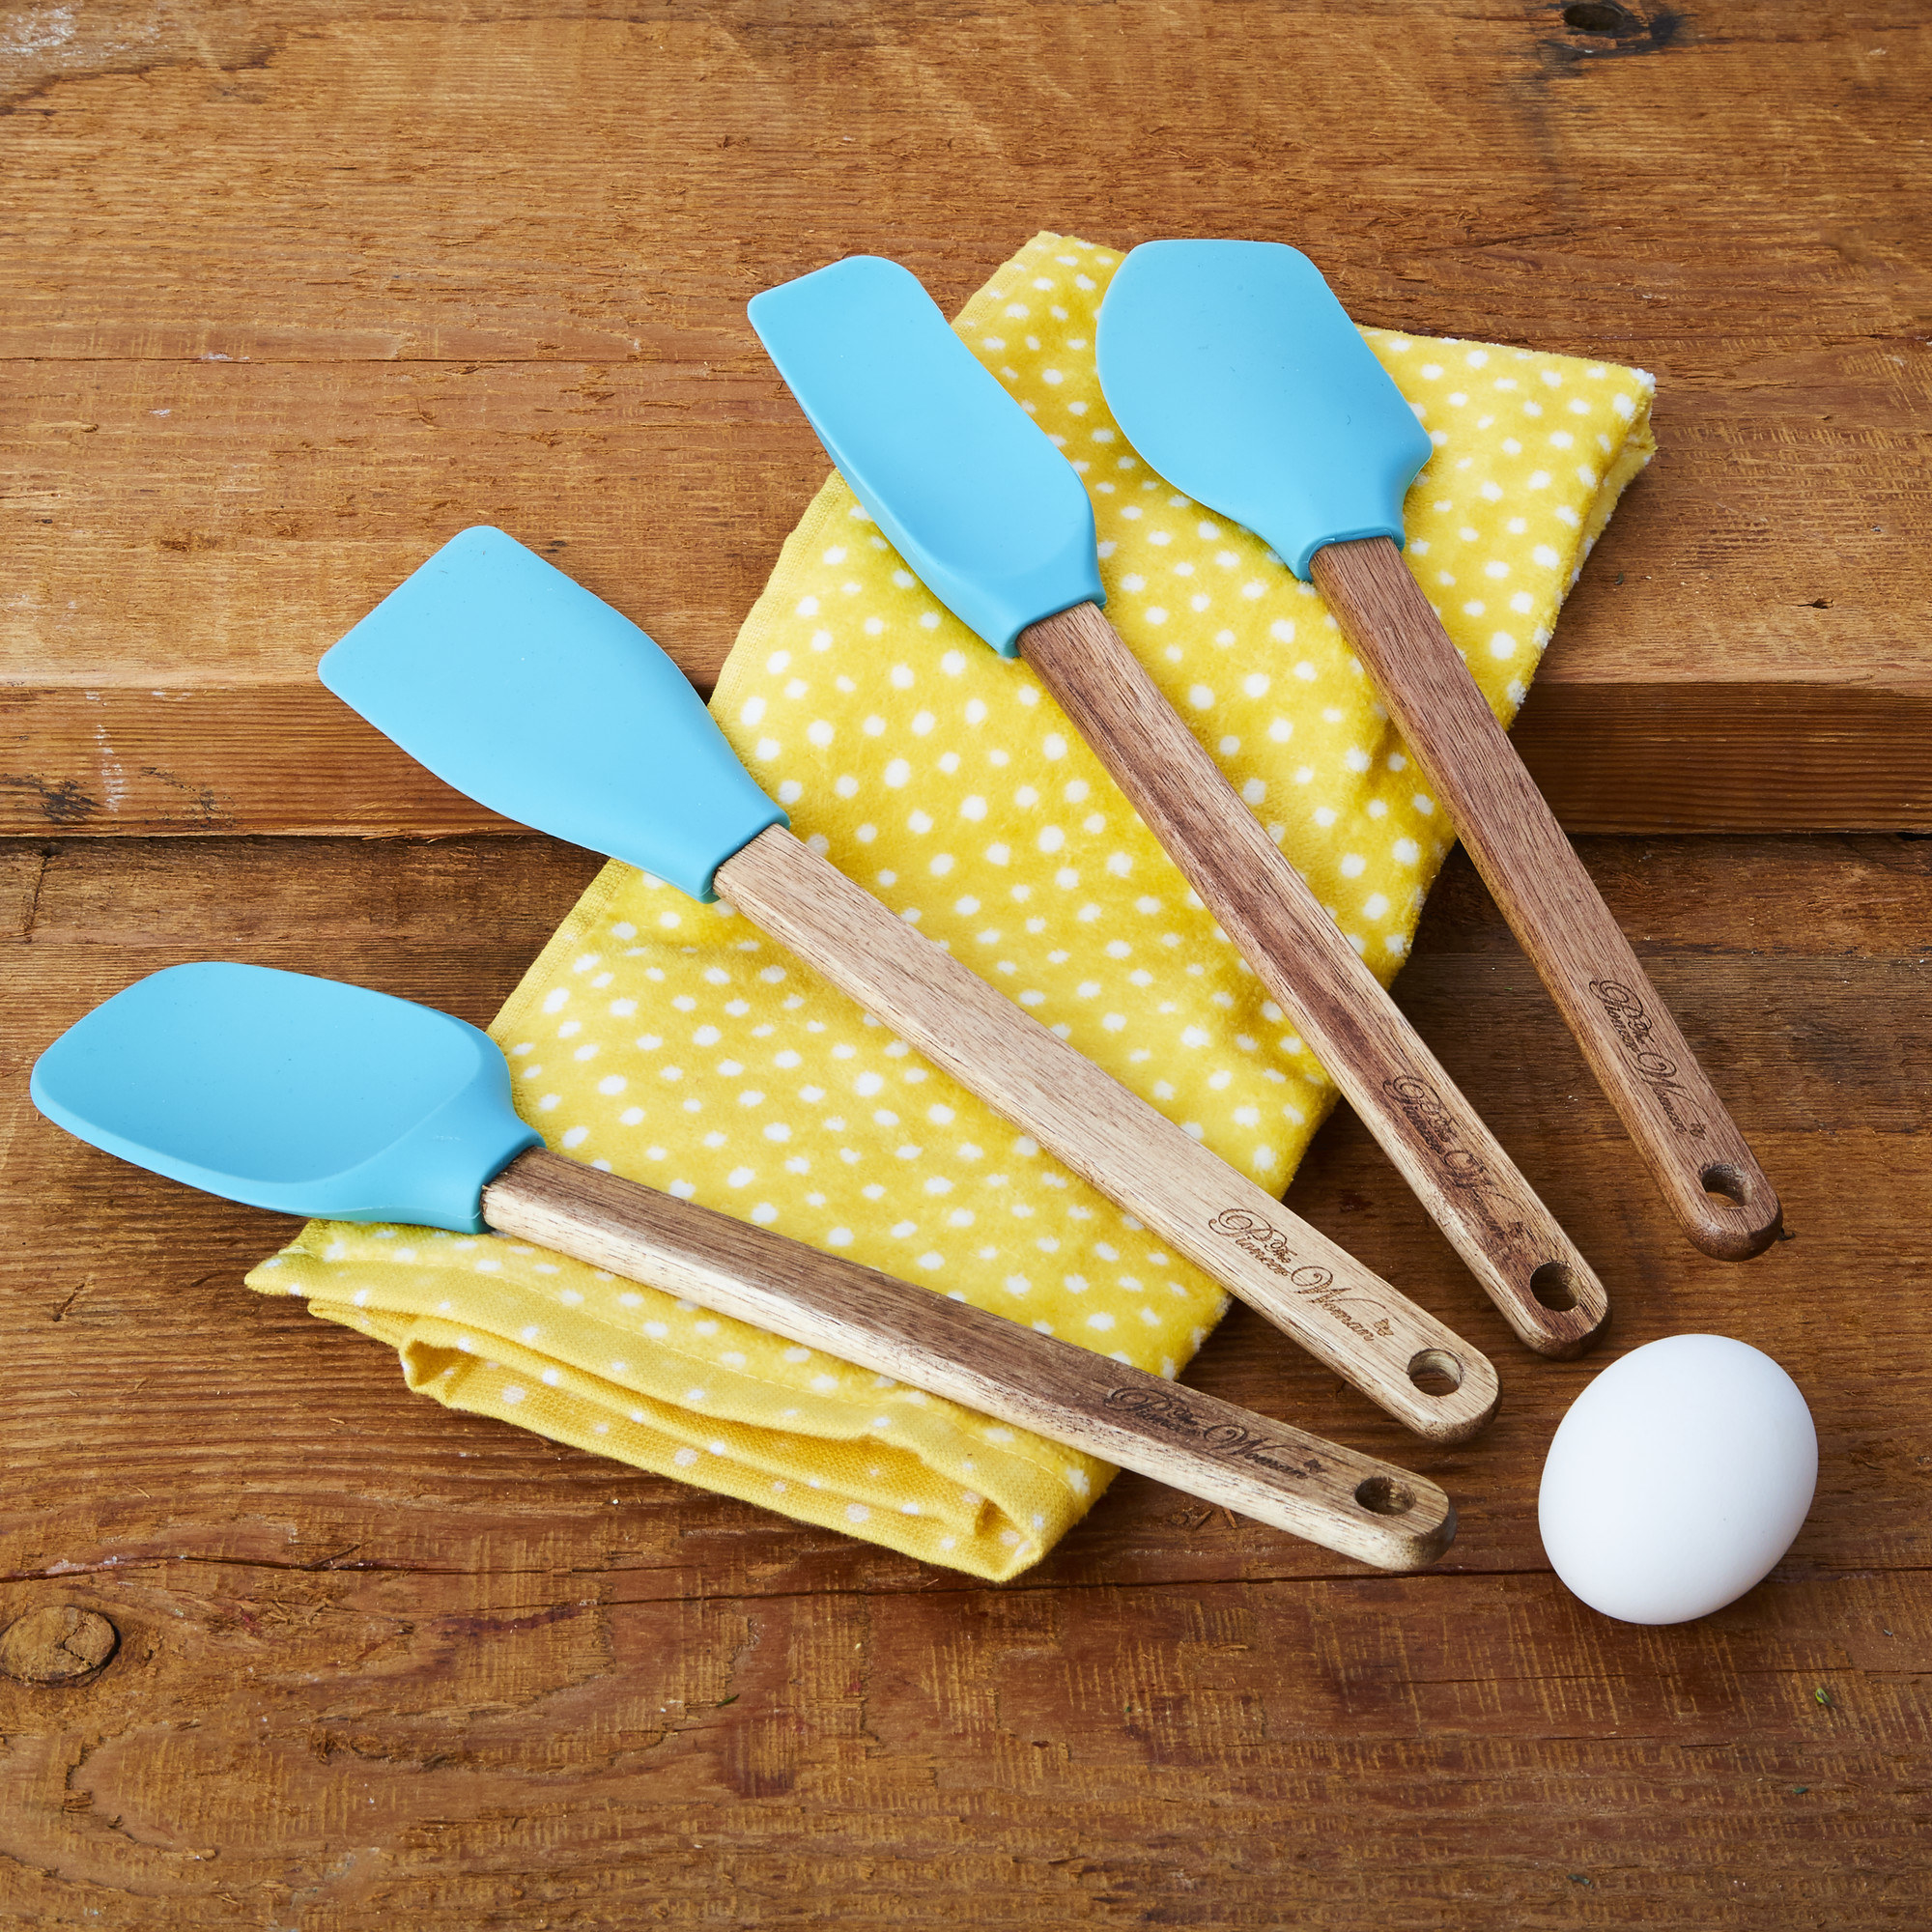 the wooden set with blue tops laying on a yellow polka dot towel